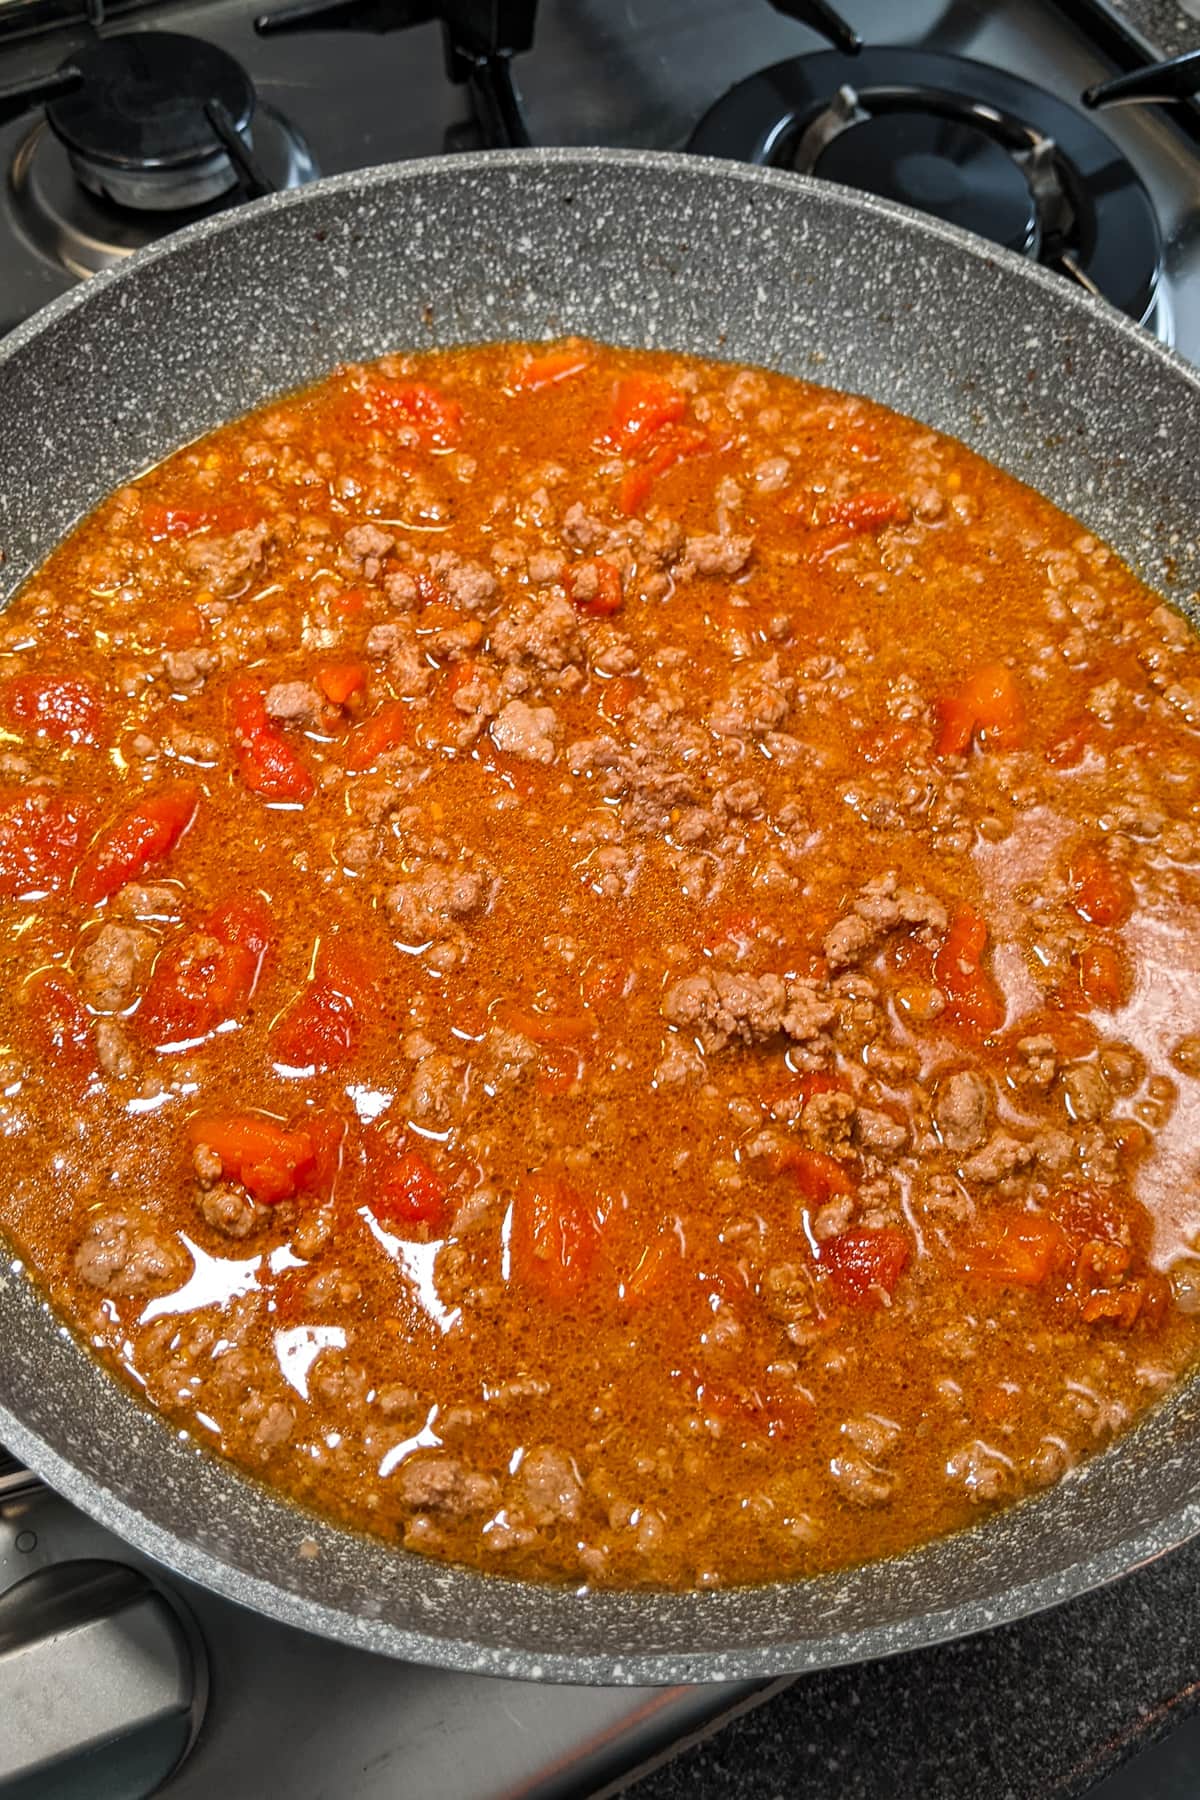 Ground beef sauce in a frying pan on the stove.